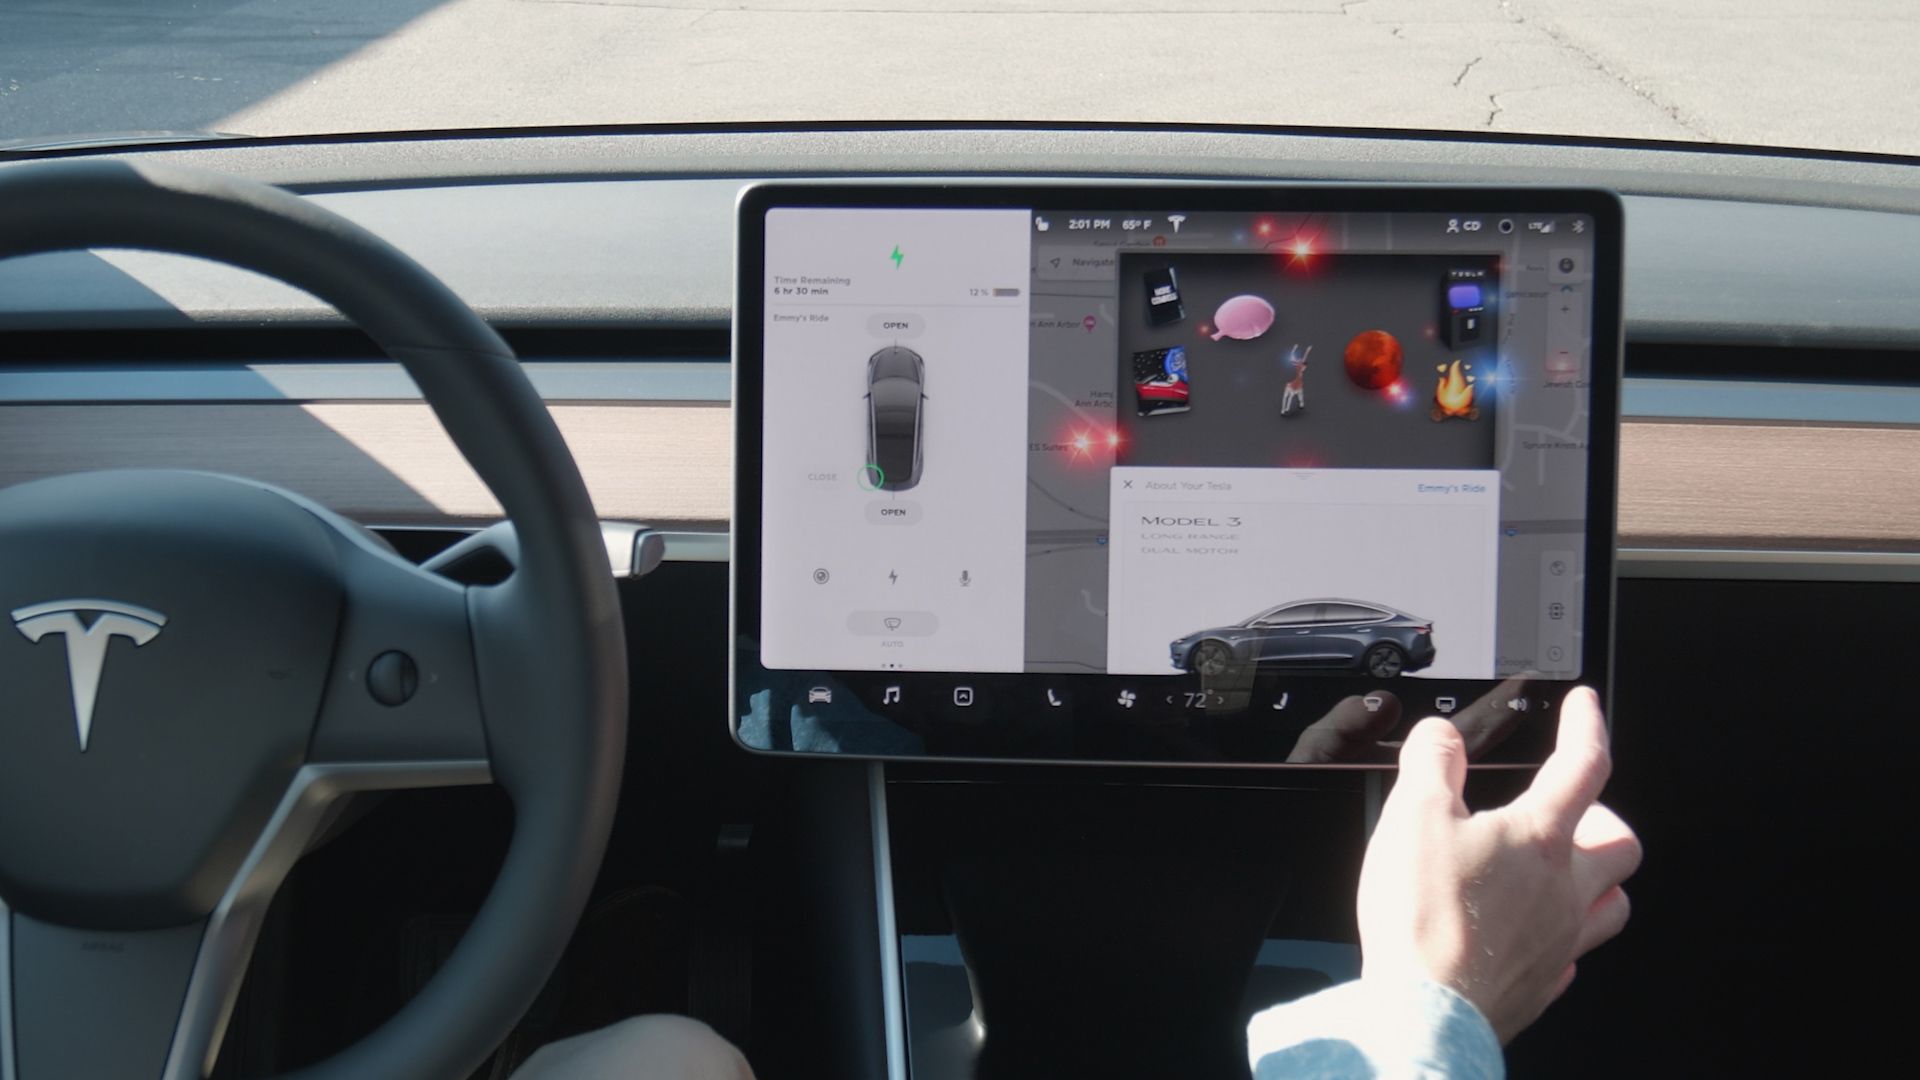 Now You Can View Tesla Model 3 Past Dashcam Footage on Its Screen